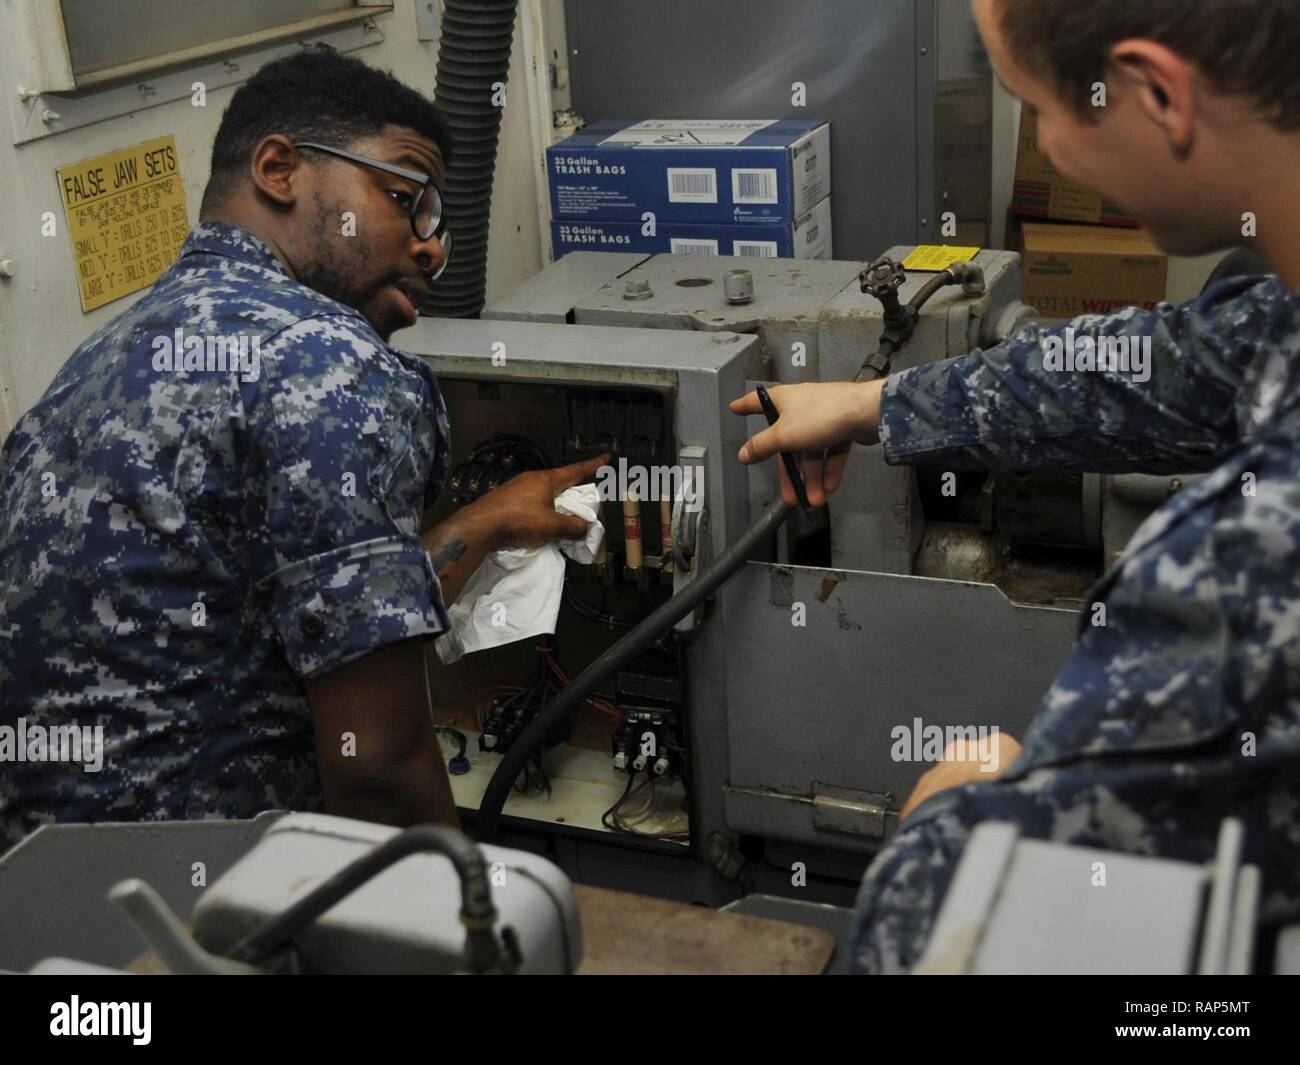 POLARIS POINT, Guam (Feb. 22, 2017) Electrician's Mate Fireman Ketab Hairston and Electrician's Mate 2nd Class Erik Wenthe, both Sailors assigned to the submarine tender USS Emory S. Land (AS 39), conduct maintenance on a grinder drill in the ship's machine shop. Emory S. Land, homeported in Guam, provides maintenance, hotel services and logistical support to submarines and surface ships in the U.S. 5th and 7th Fleet areas of operations. Stock Photo